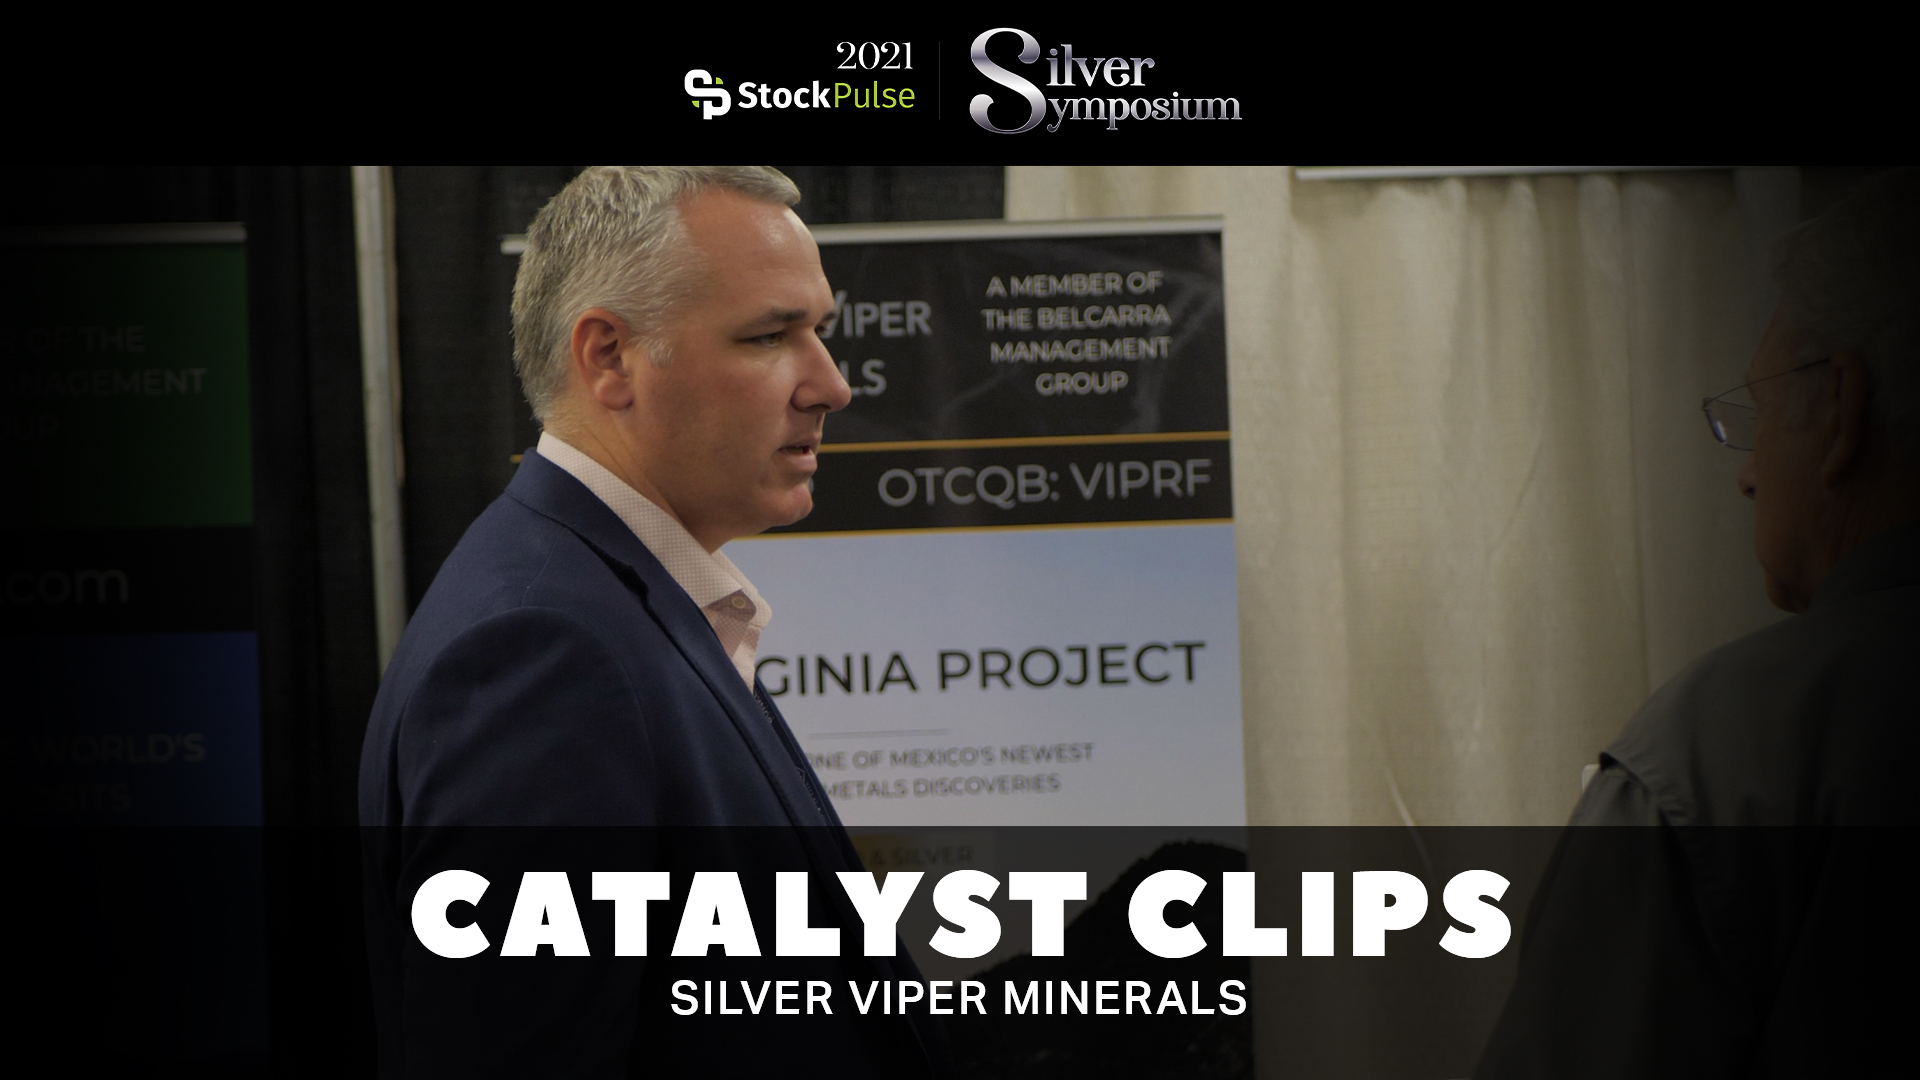 2021 StockPulse Silver Symposium Catalyst Clips | Steve Cope of Silver Viper Minerals